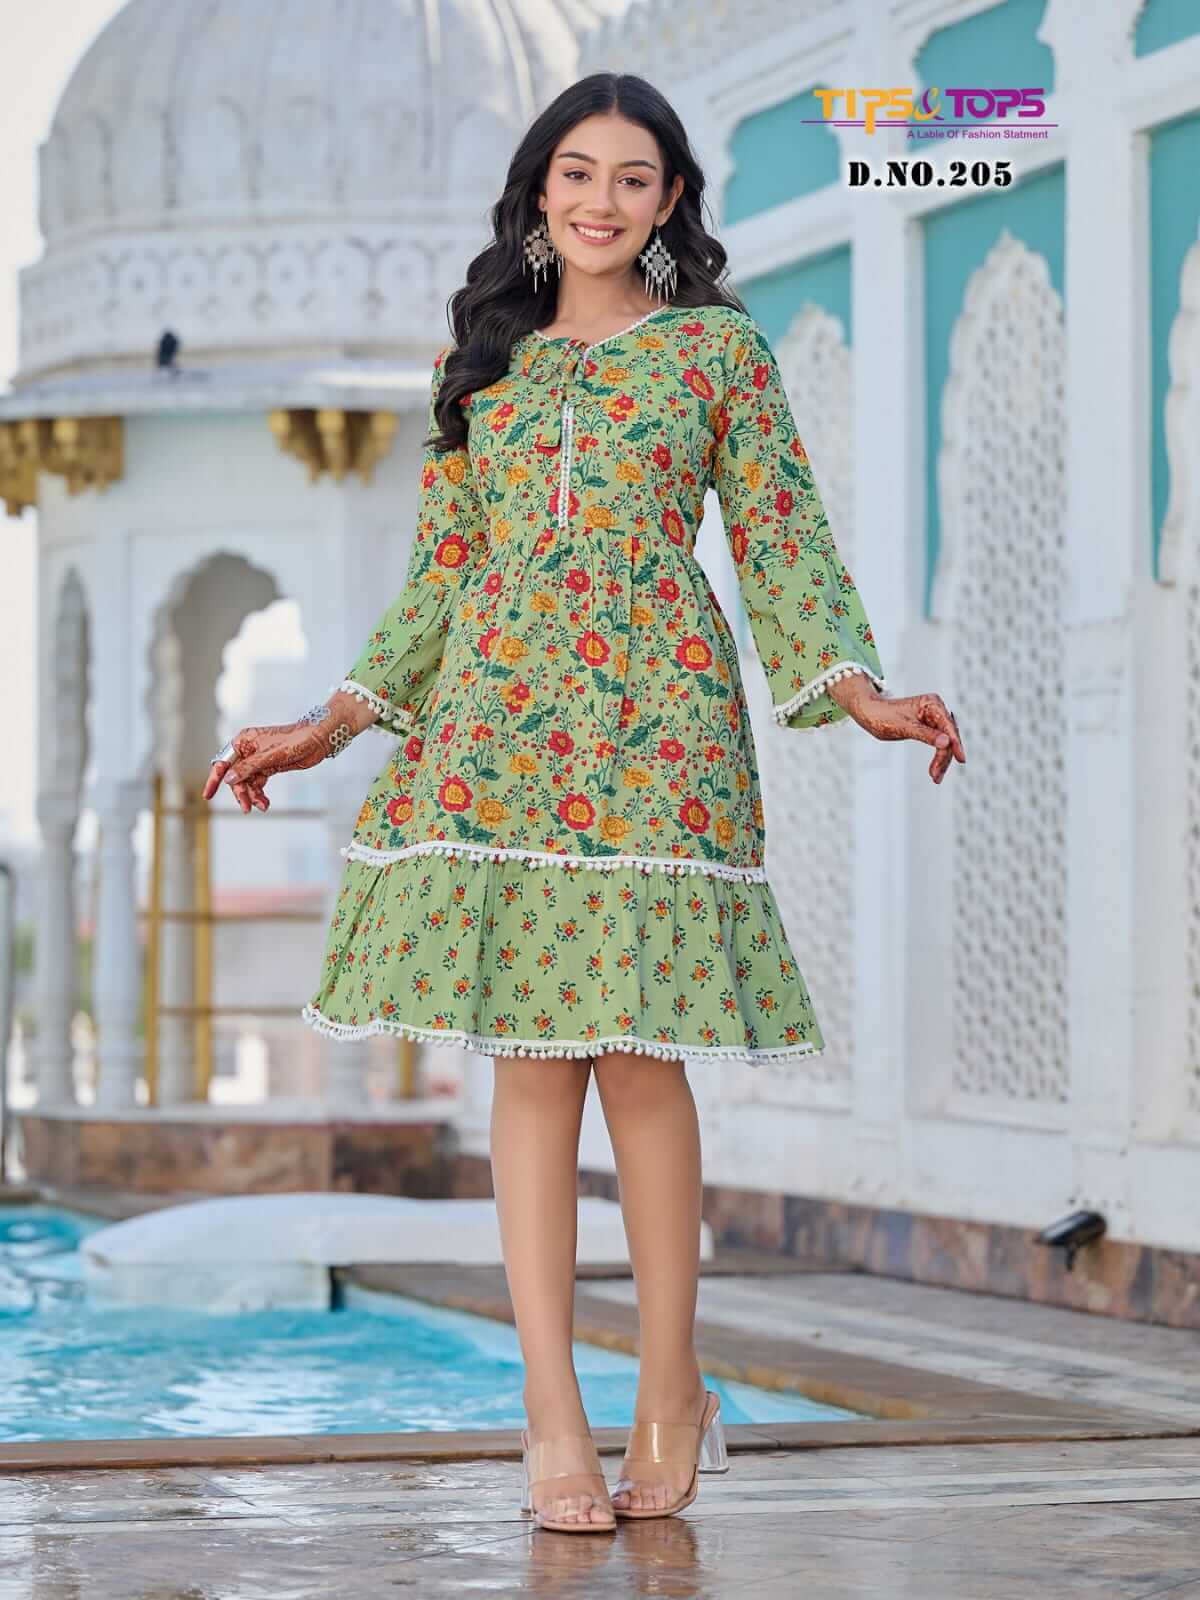 Tips And Tops Fusion Vol 2 One Piece Dress Catalog collection 6